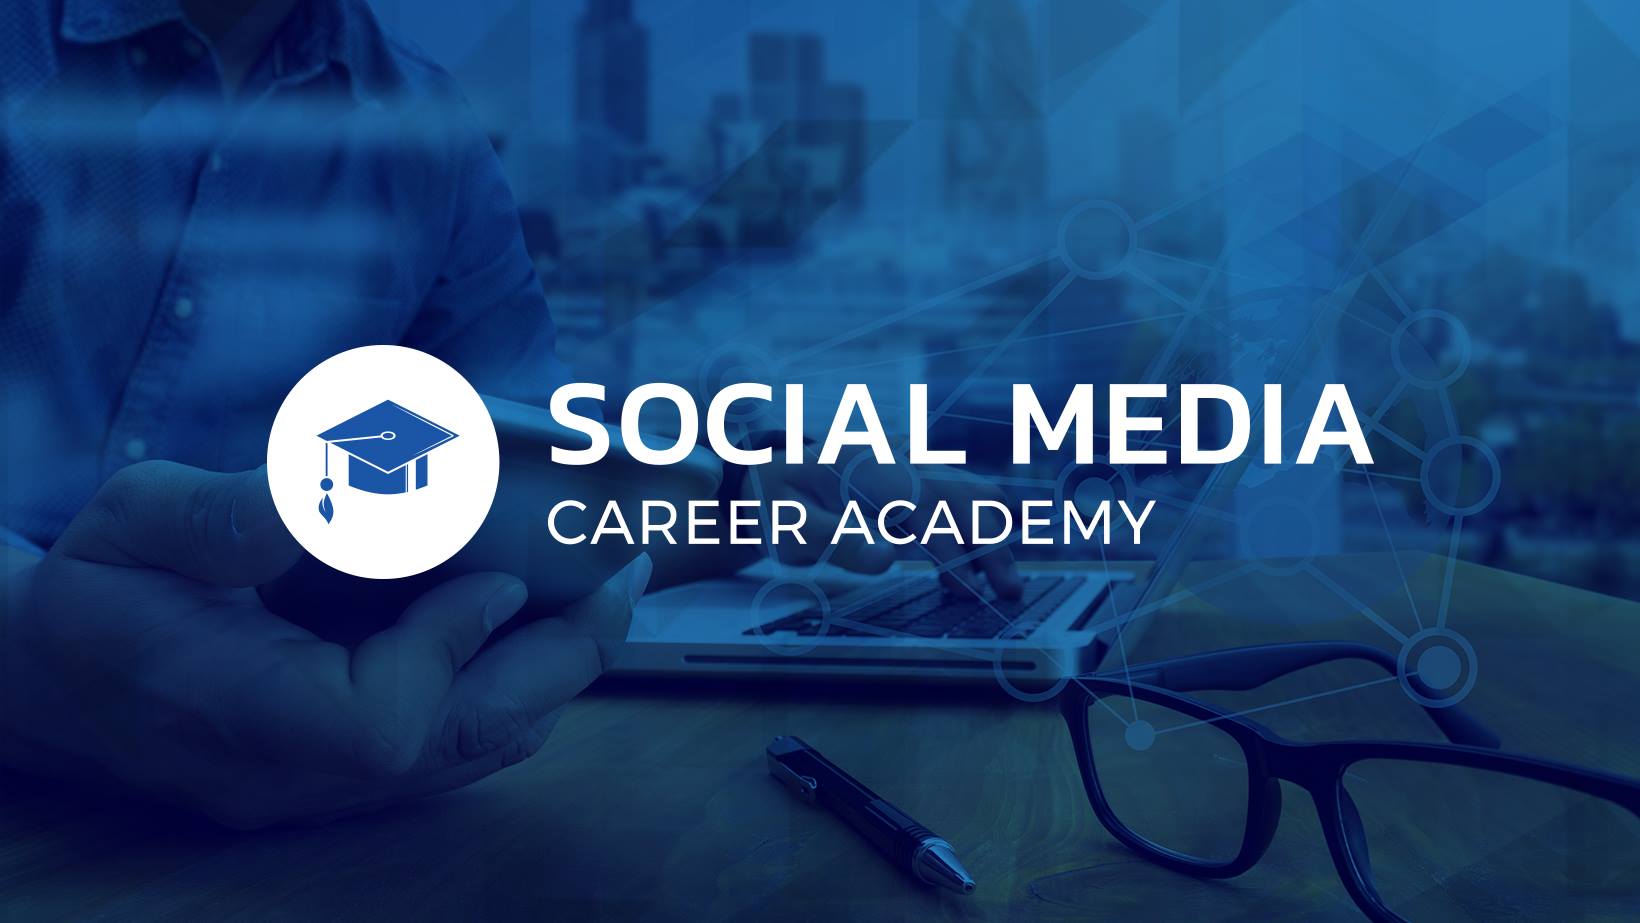 Social Media Career Academy is an online-based training hub for professionals and brands.